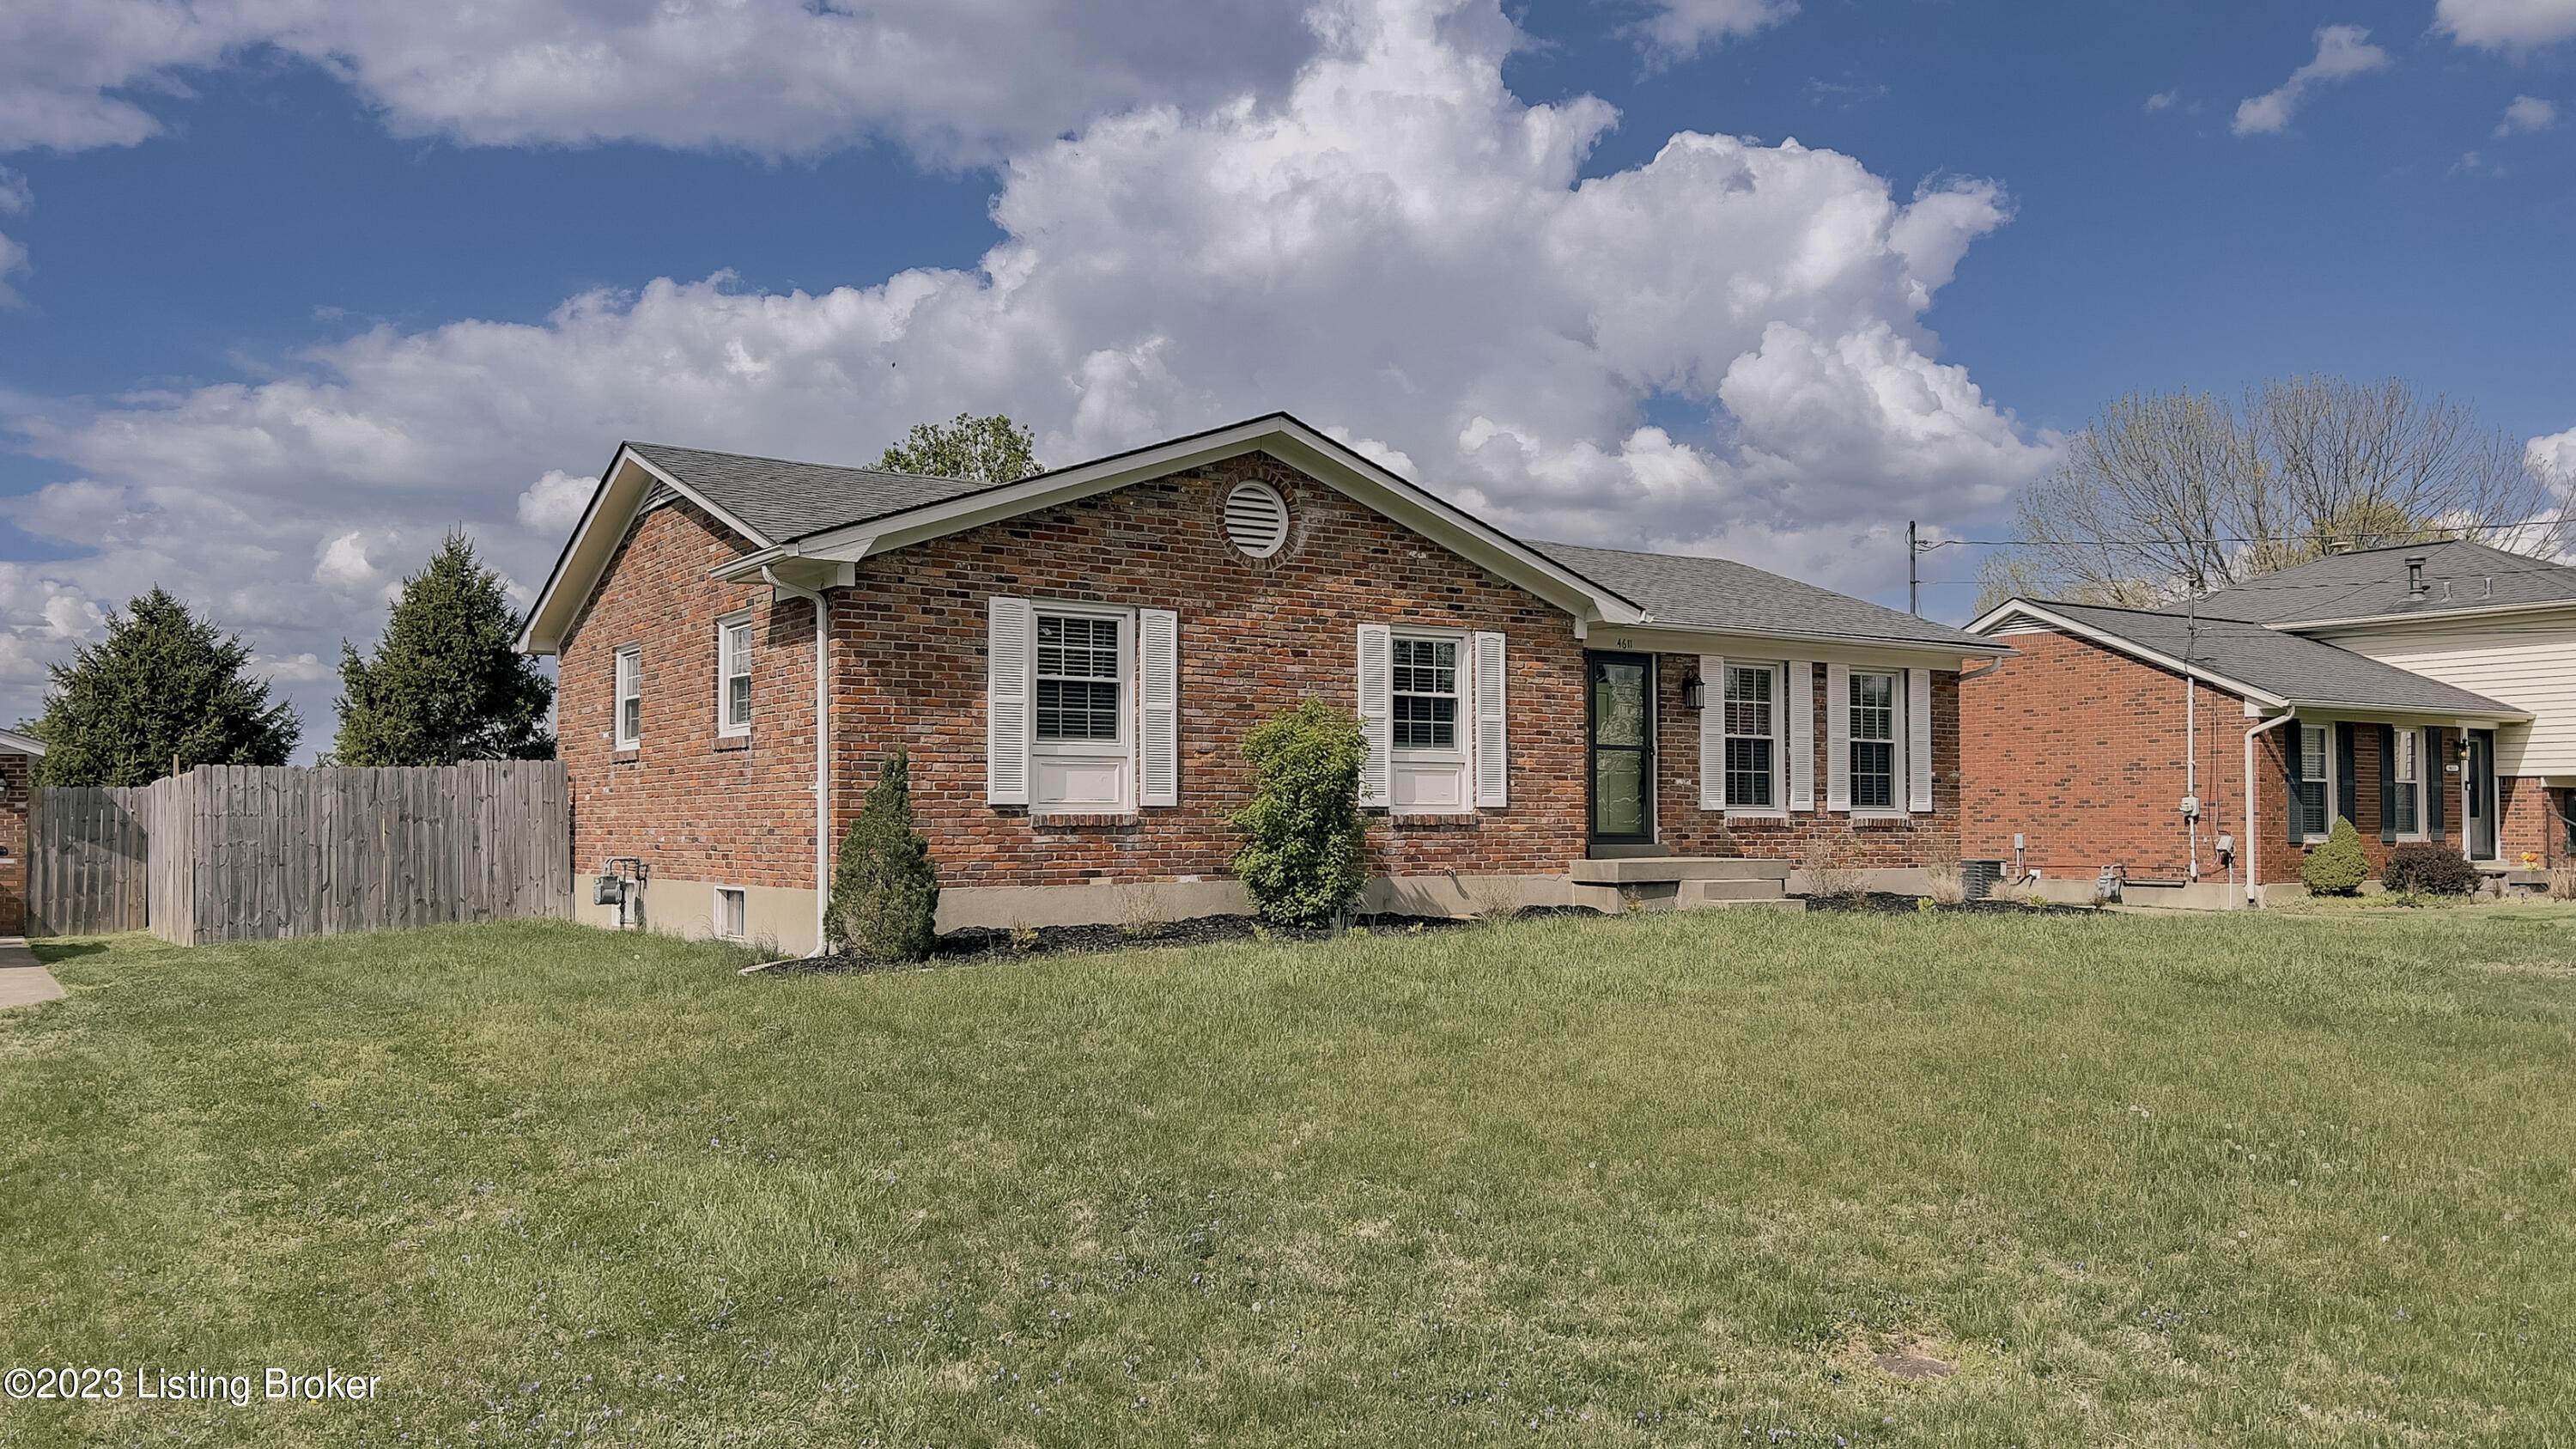 31. Single Family at Louisville, KY 40229